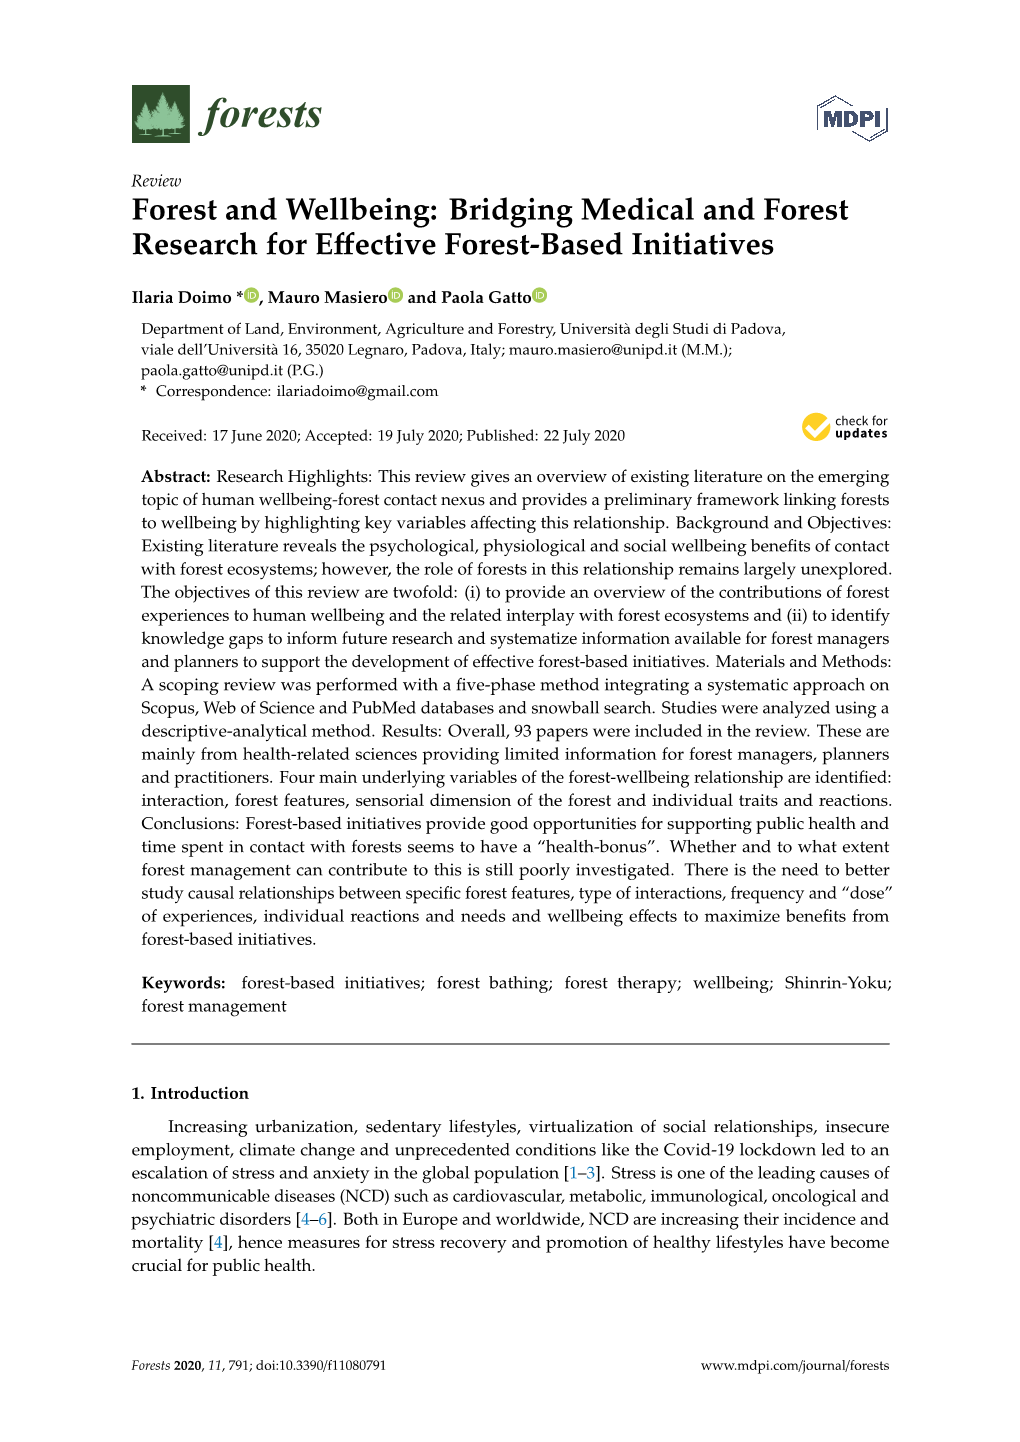 Forest and Wellbeing: Bridging Medical and Forest Research for Eﬀective Forest-Based Initiatives